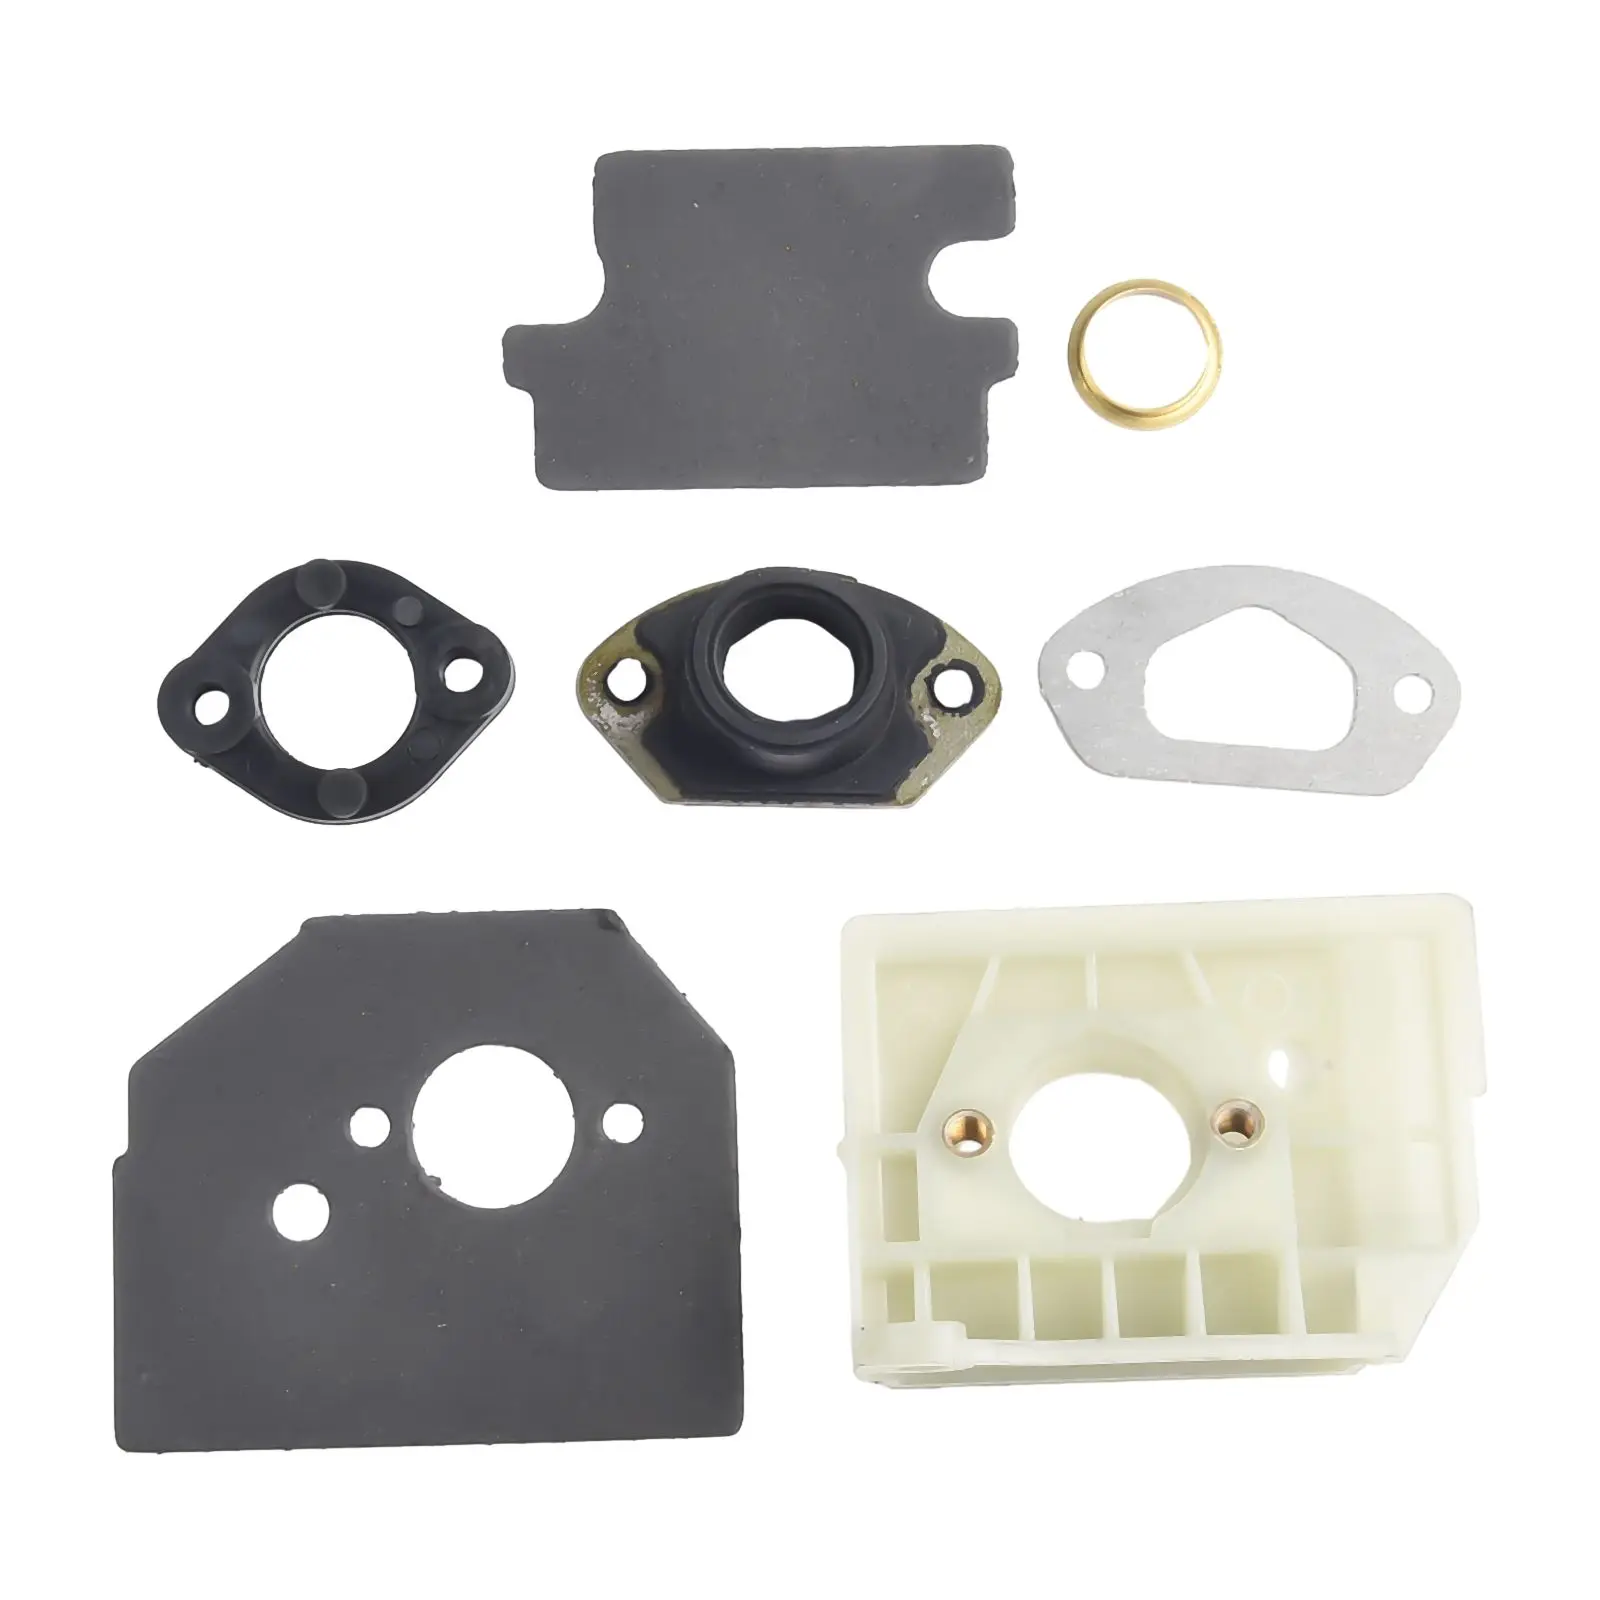 

Carburetor Bracket Spacer Inner Guide Gaskets Fit For Chainsaw 4500 5200 5800 Garden Power Tools Replacement Accessories